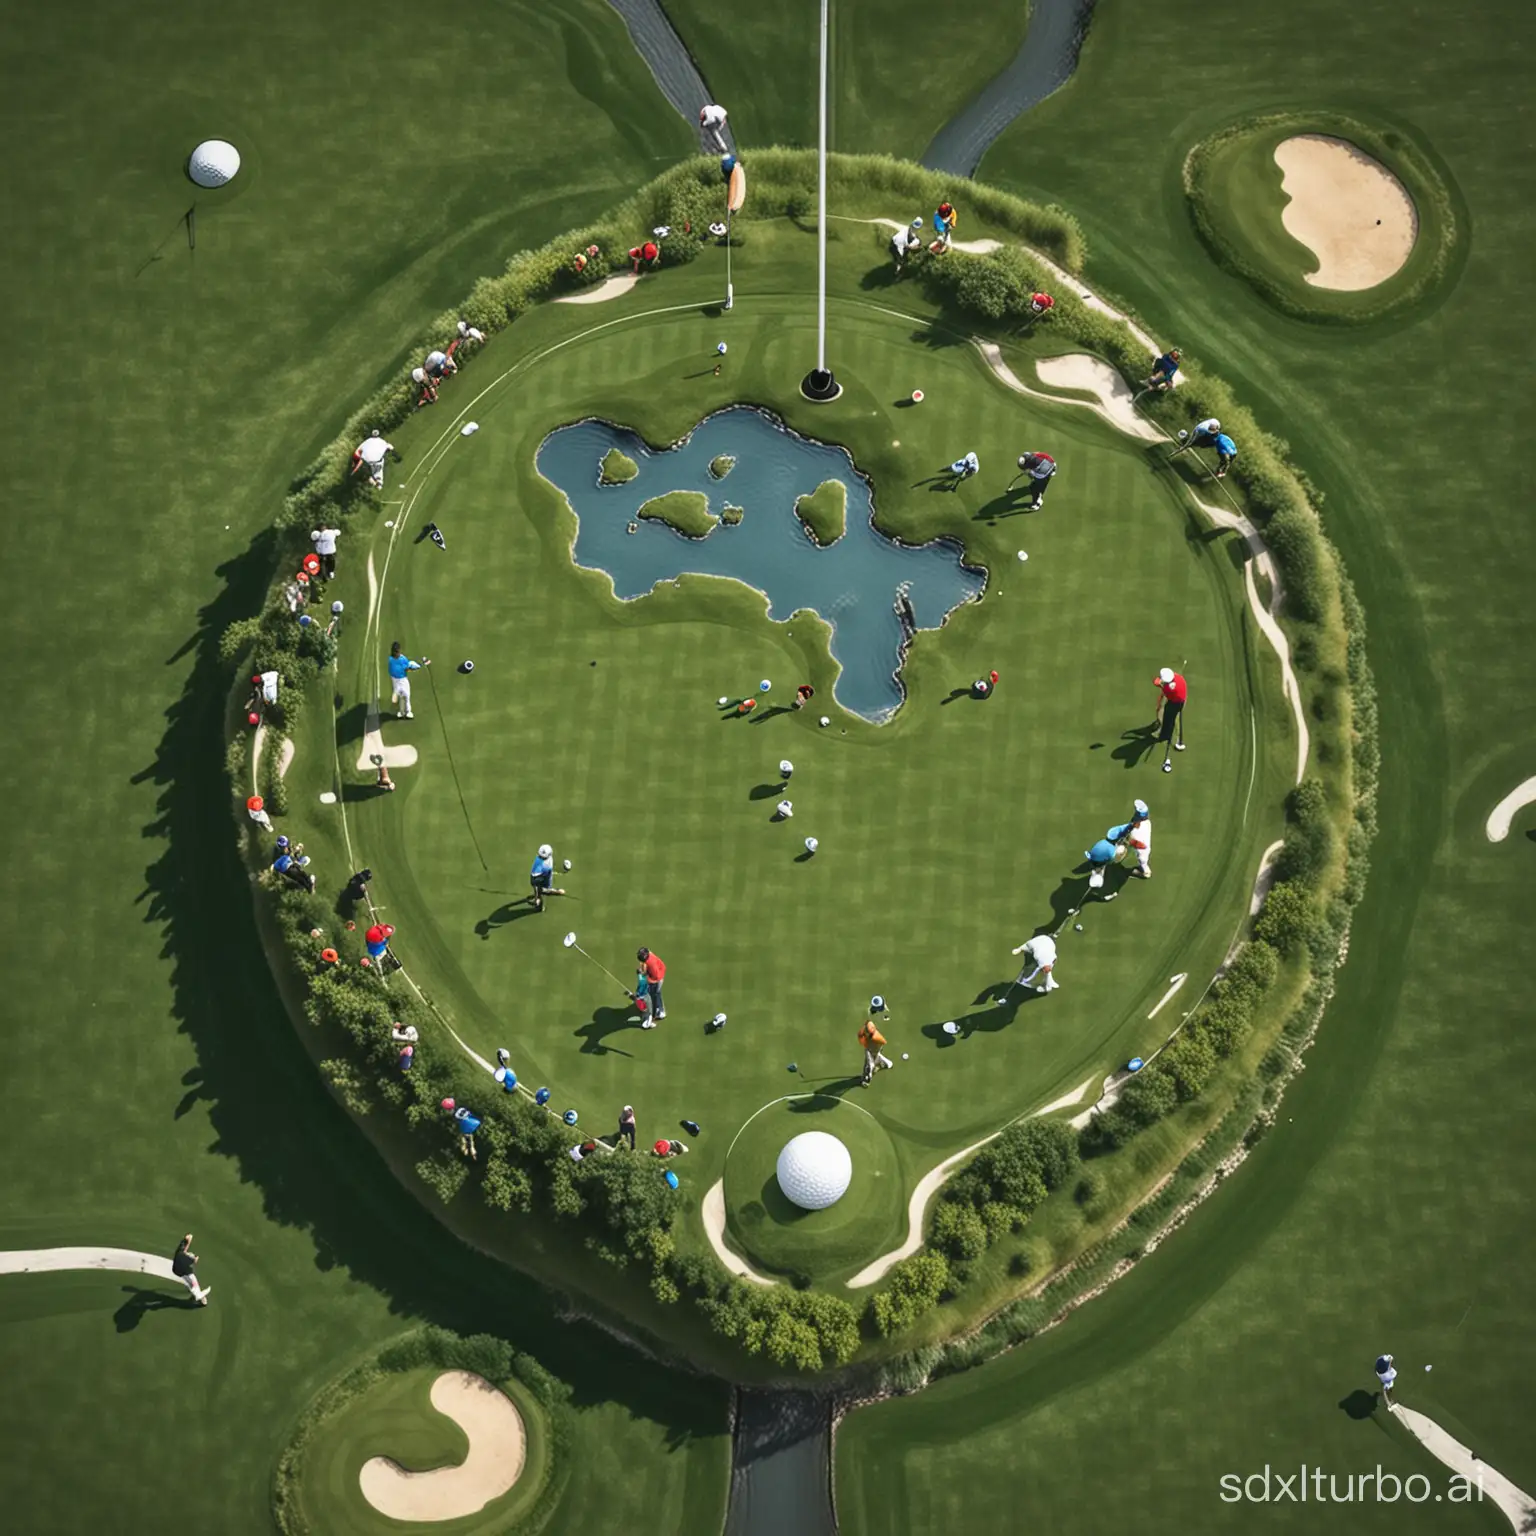 Global-Golf-Networking-ConnectGolf-App-Brings-Players-Together